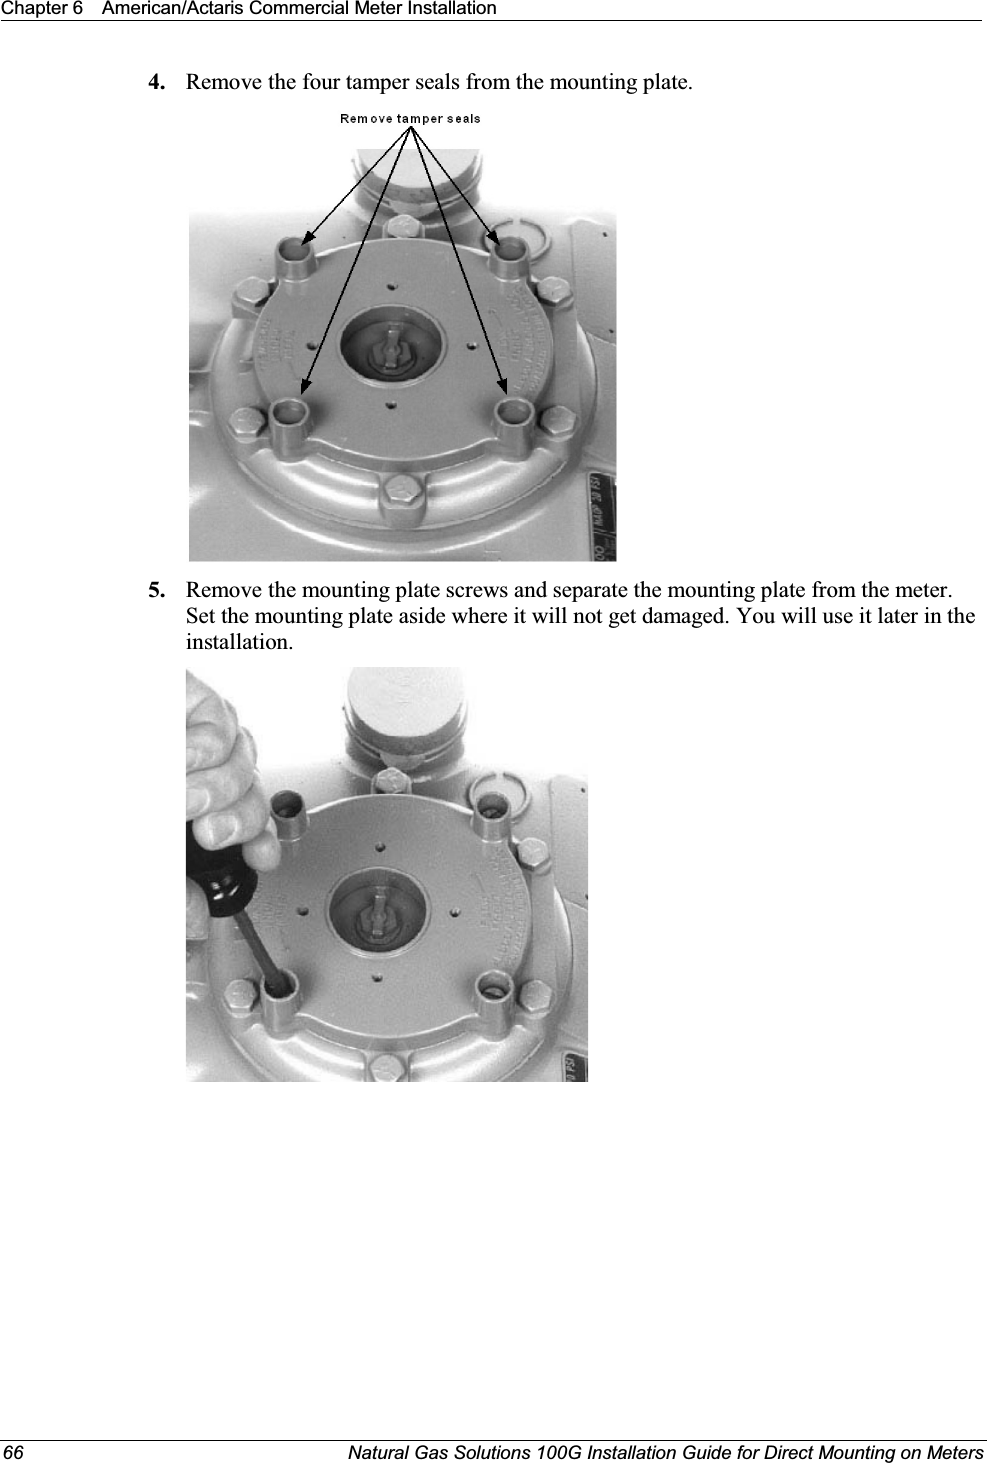 Chapter 6 American/Actaris Commercial Meter Installation66 Natural Gas Solutions 100G Installation Guide for Direct Mounting on Meters4. Remove the four tamper seals from the mounting plate. 5. Remove the mounting plate screws and separate the mounting plate from the meter. Set the mounting plate aside where it will not get damaged. You will use it later in the installation.